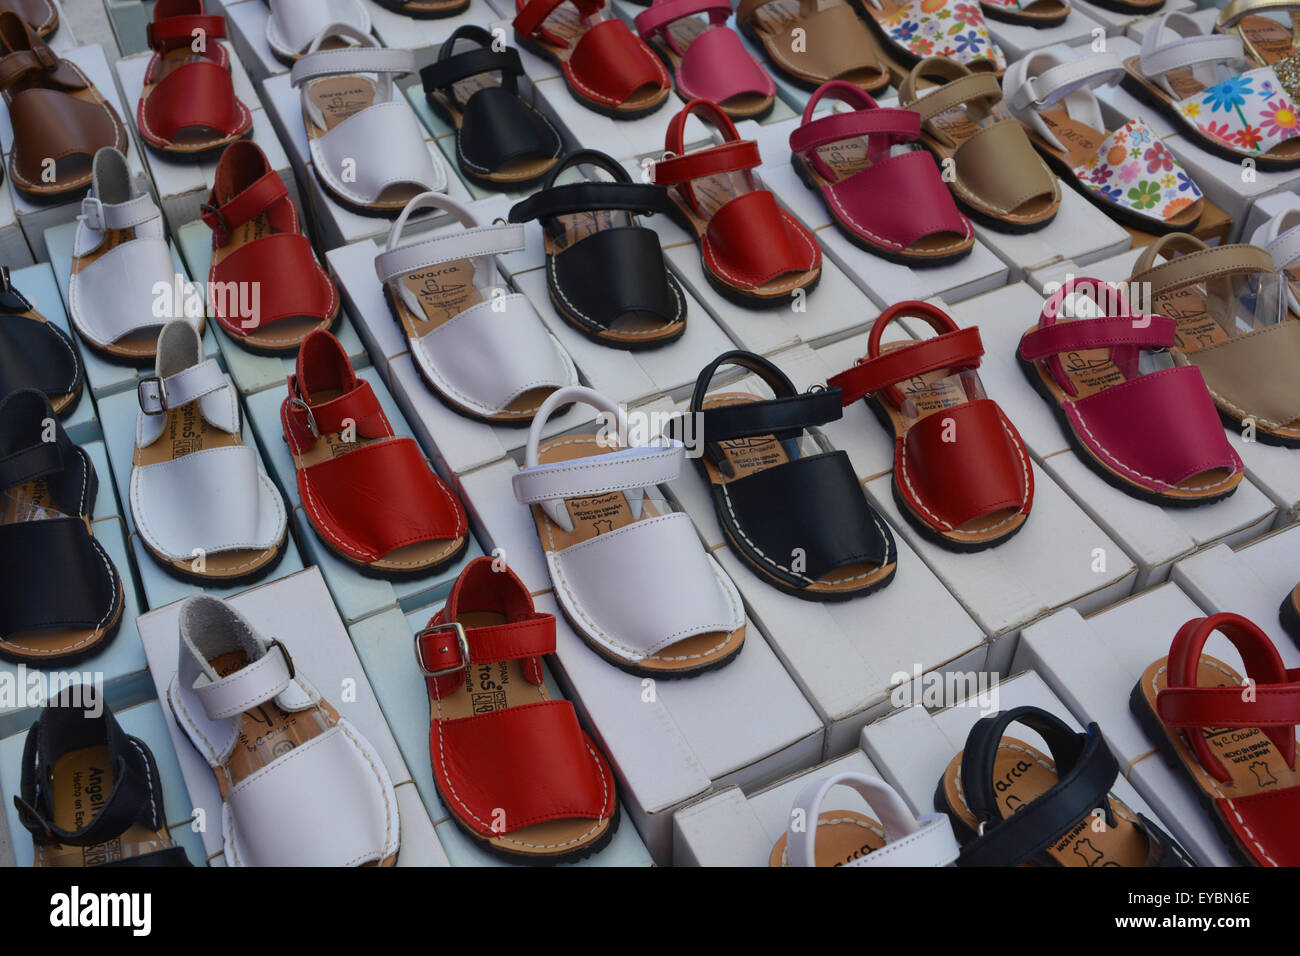 Made in spain hi-res stock photography and images - Alamy